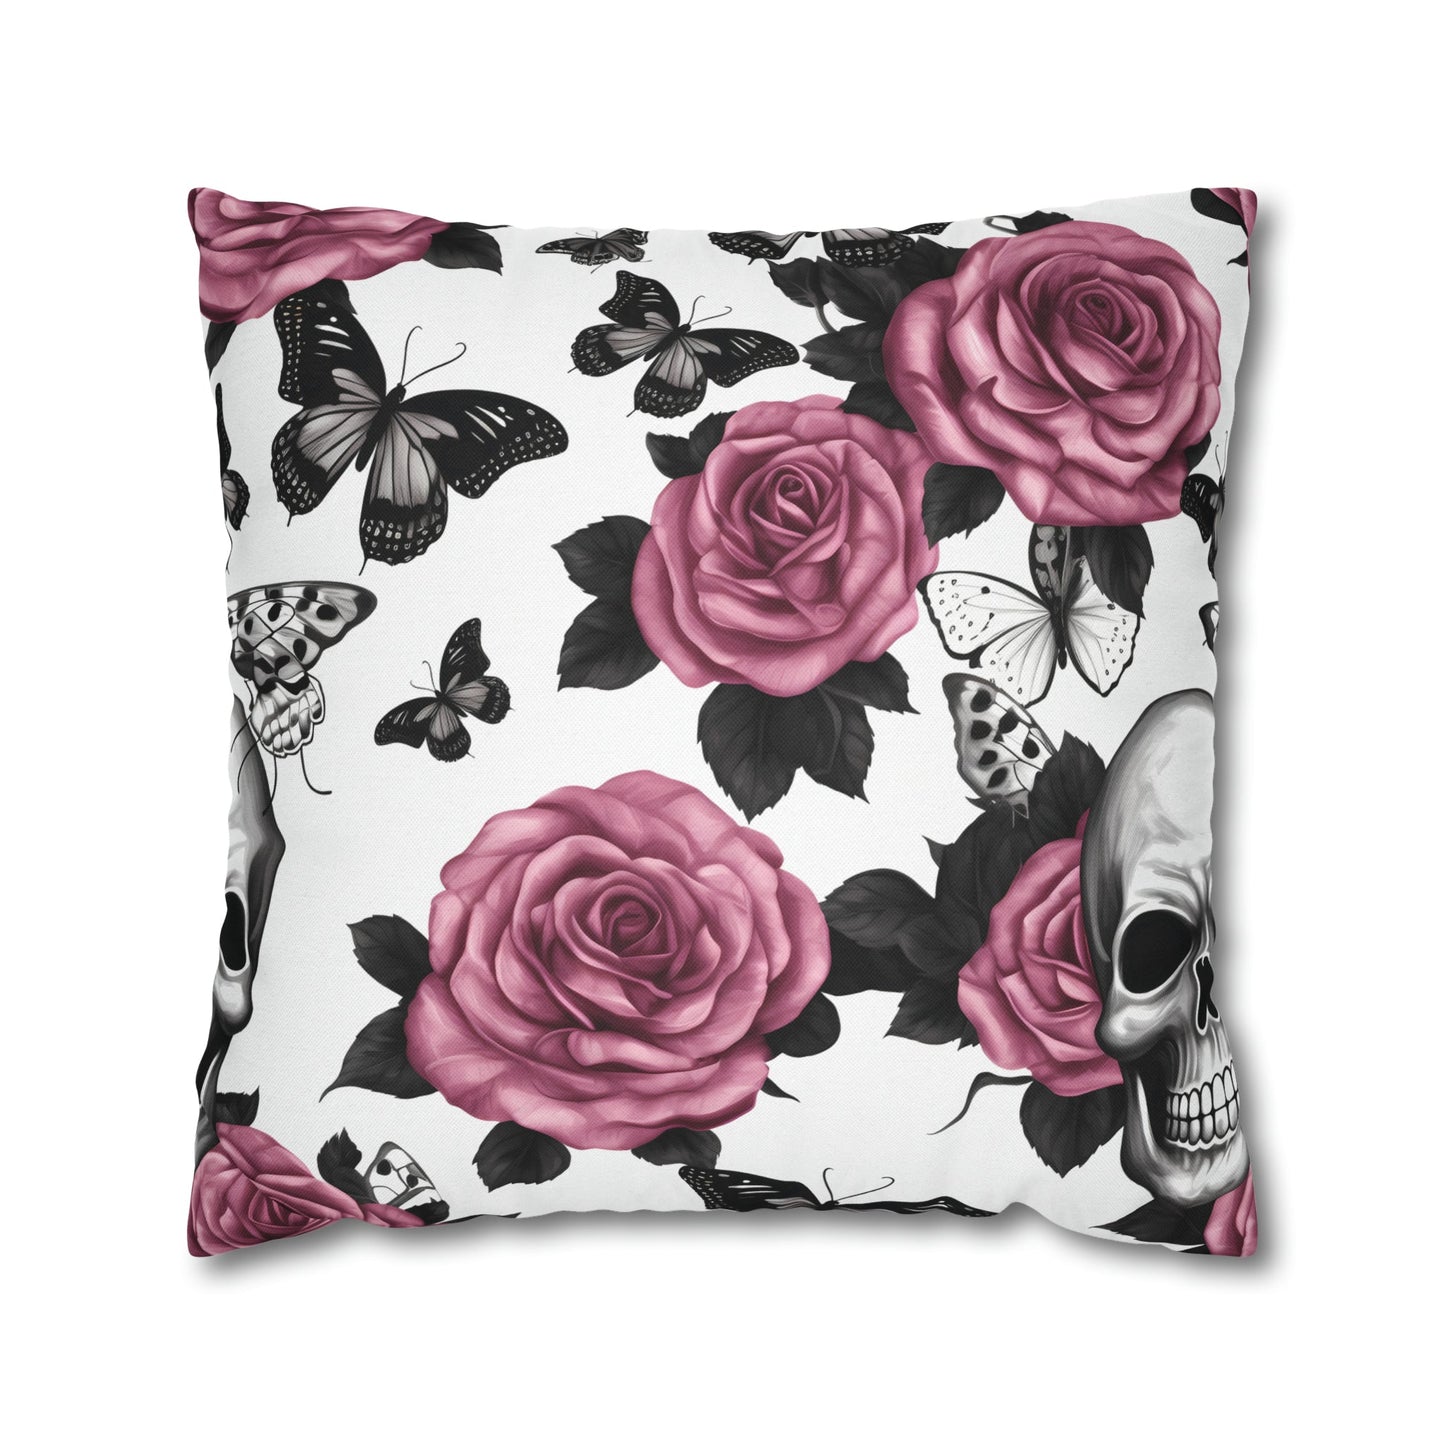 Skulls Pink Roses and Black Butterflies Square Pillow CaseHome DecorVTZdesigns20" × 20"All Over PrintAOPBed